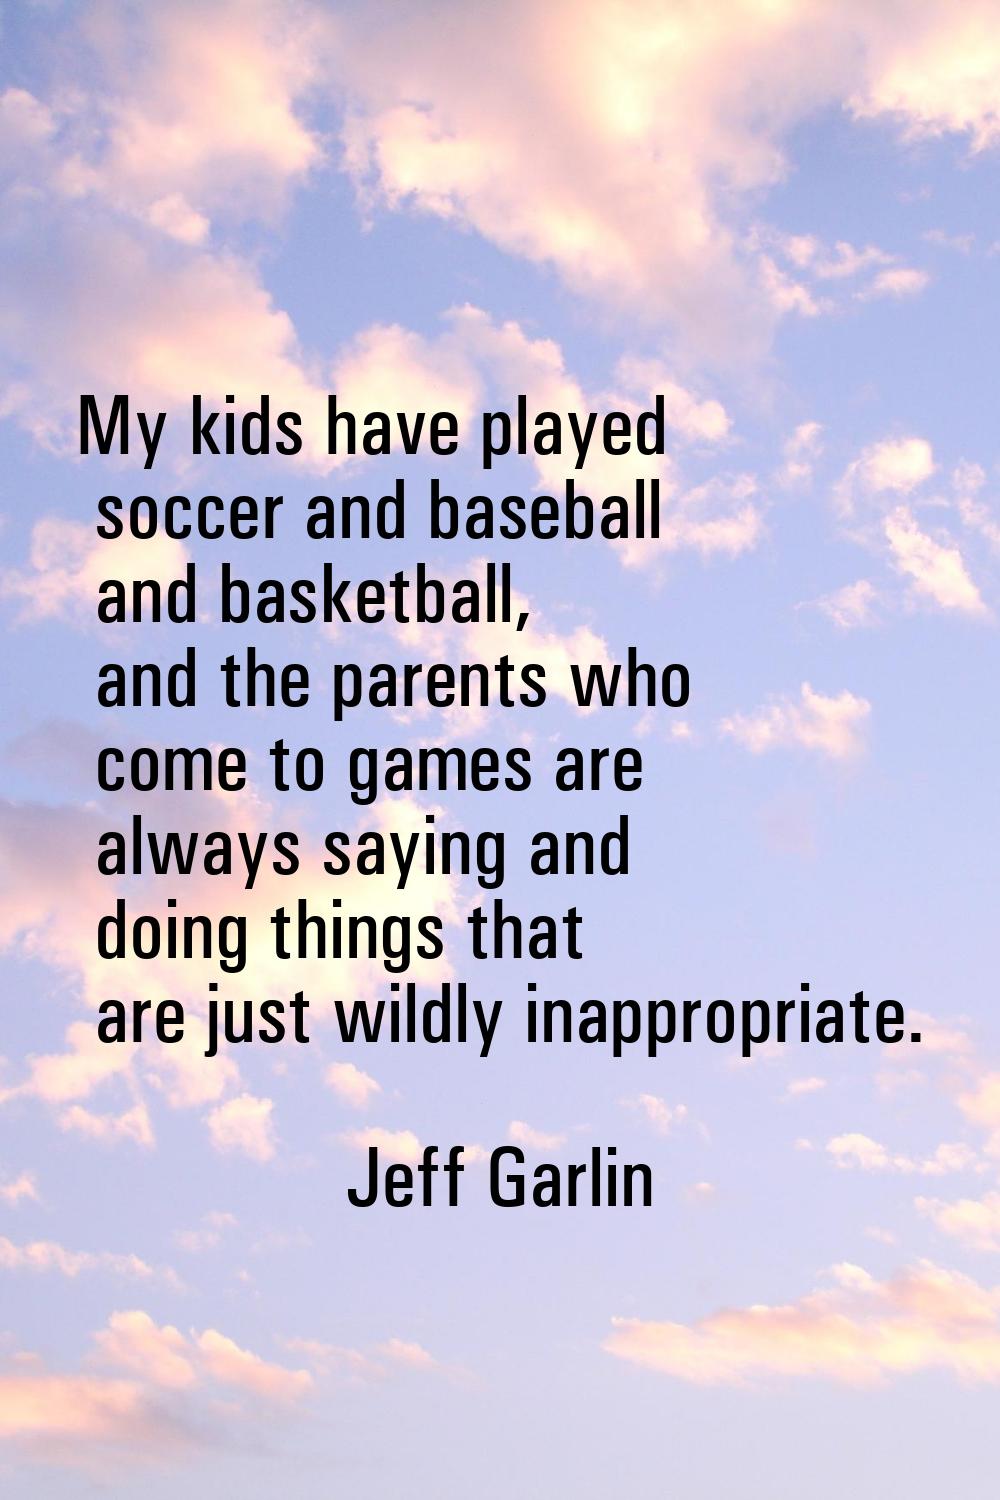 My kids have played soccer and baseball and basketball, and the parents who come to games are alway